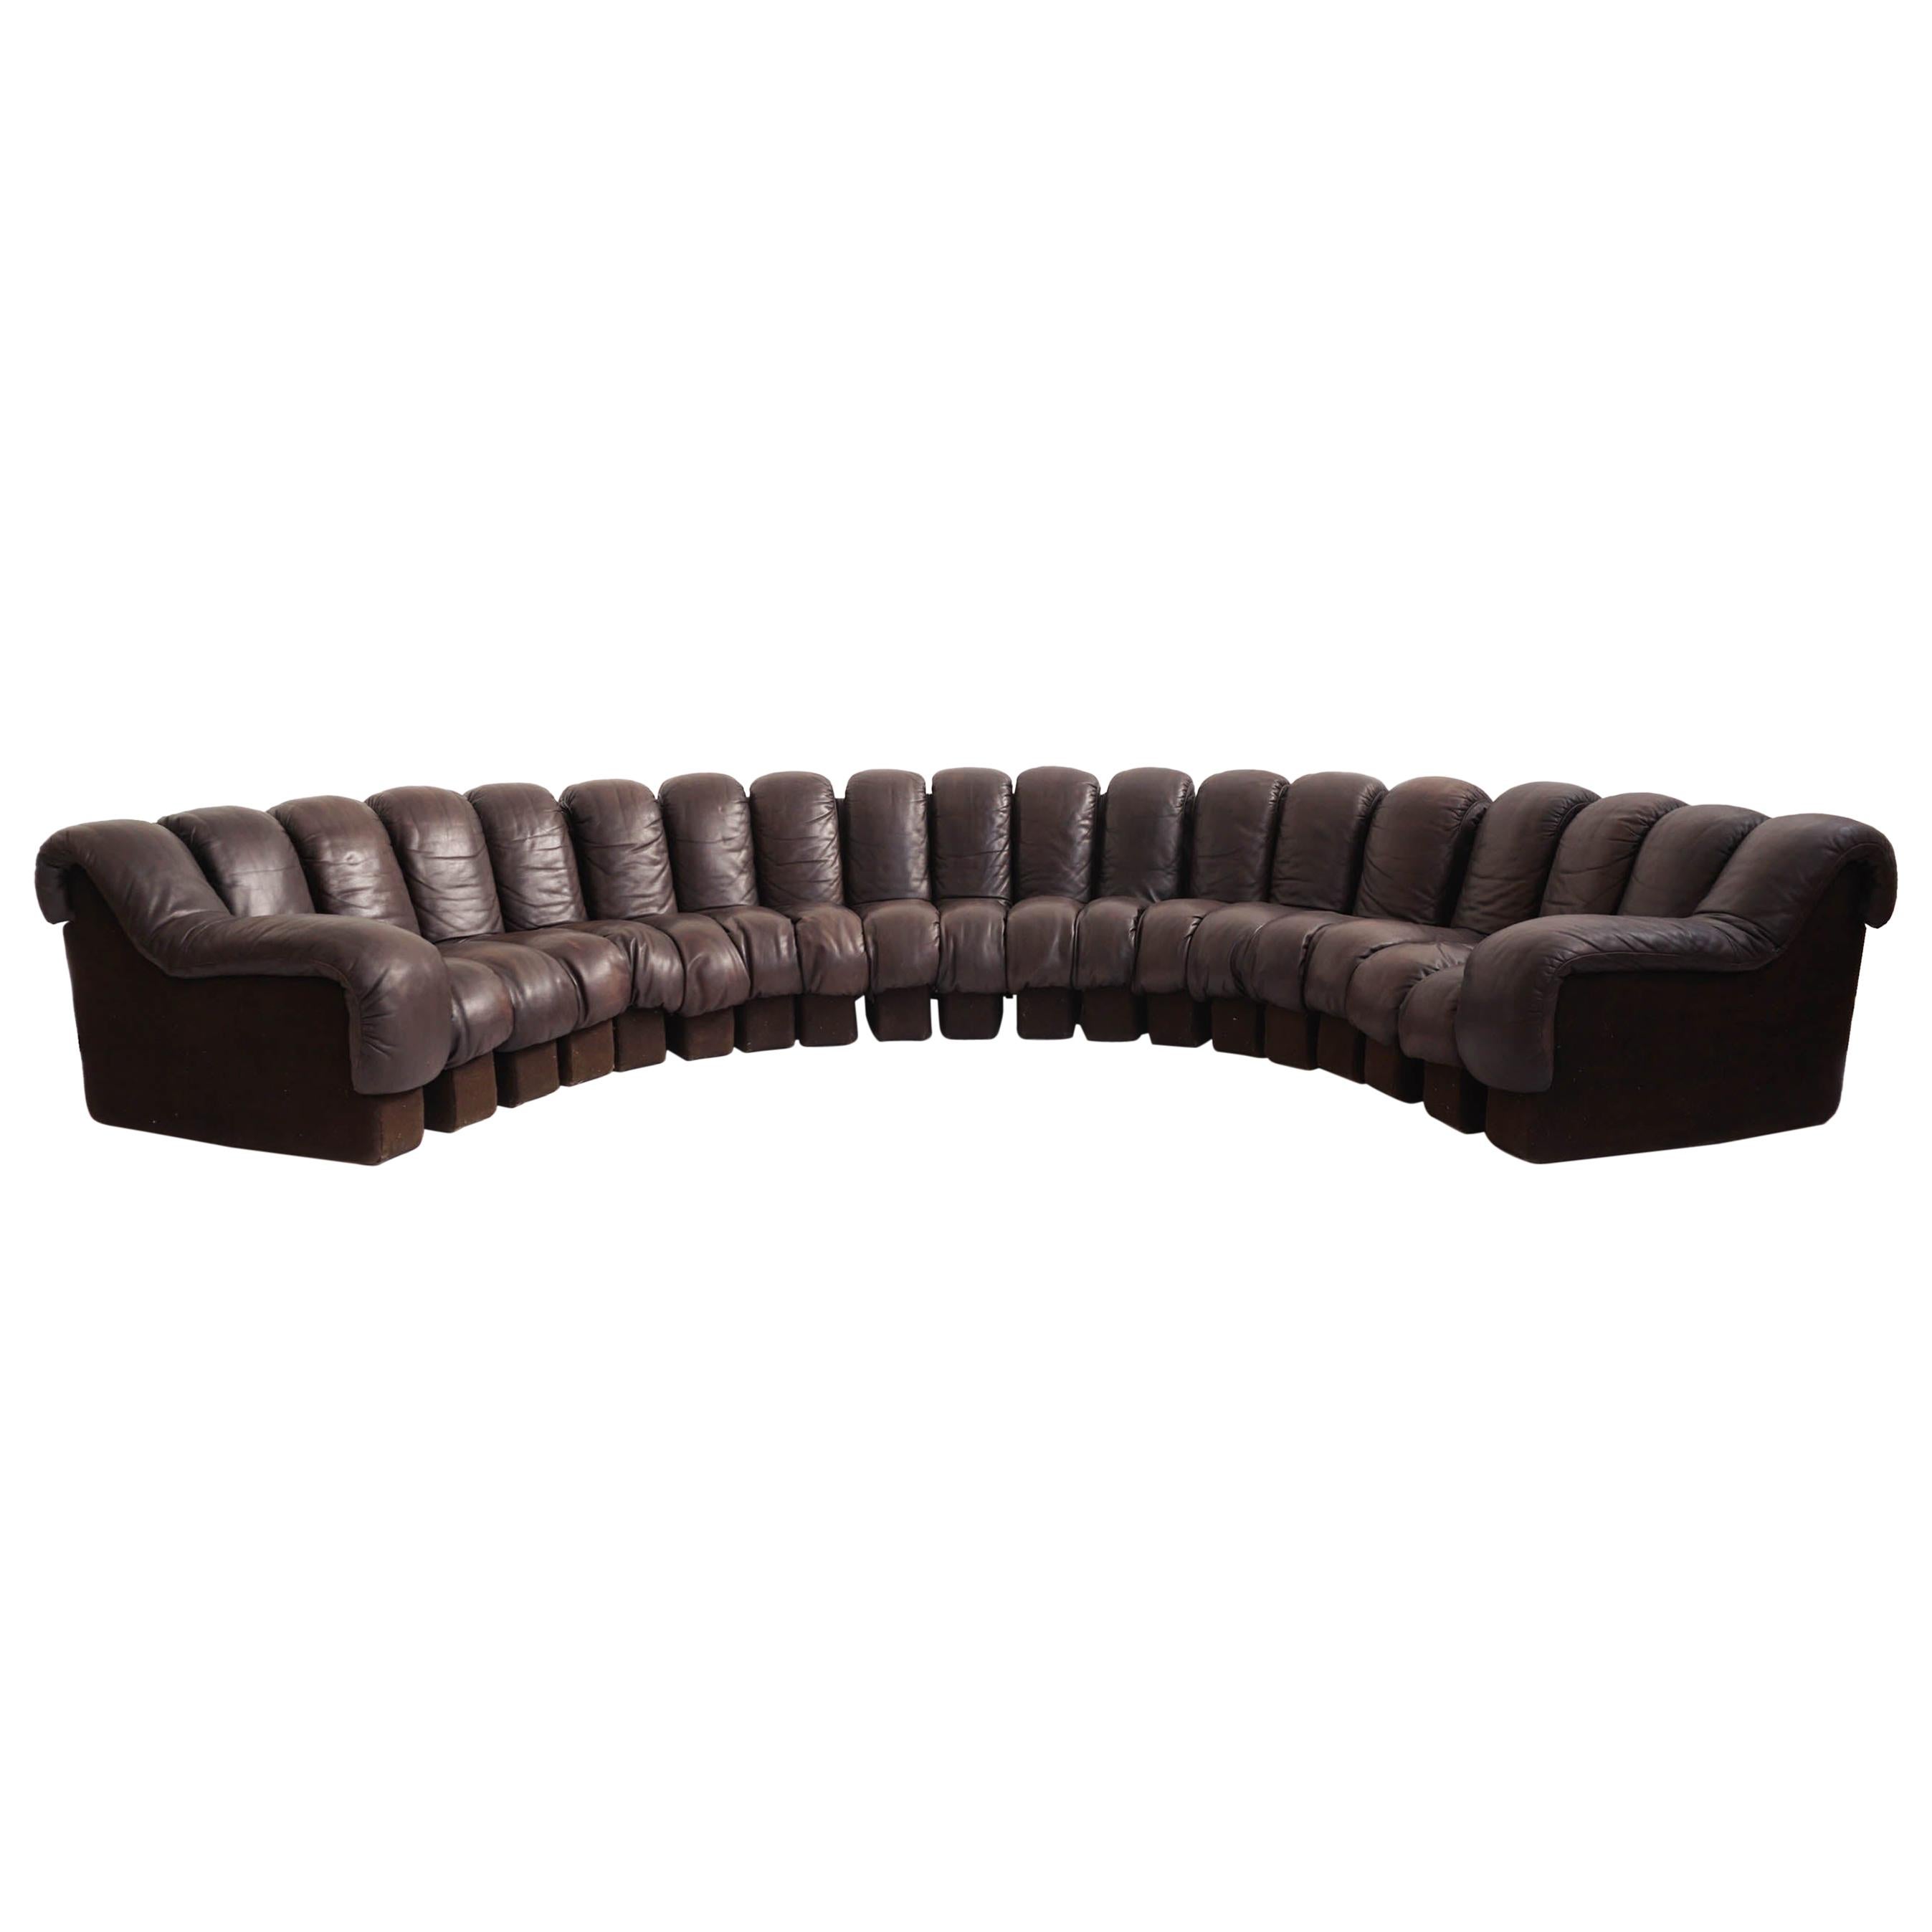 Organic De Sede DS600 "Non Stop" Brown Patinated Leather Sofa For Sale